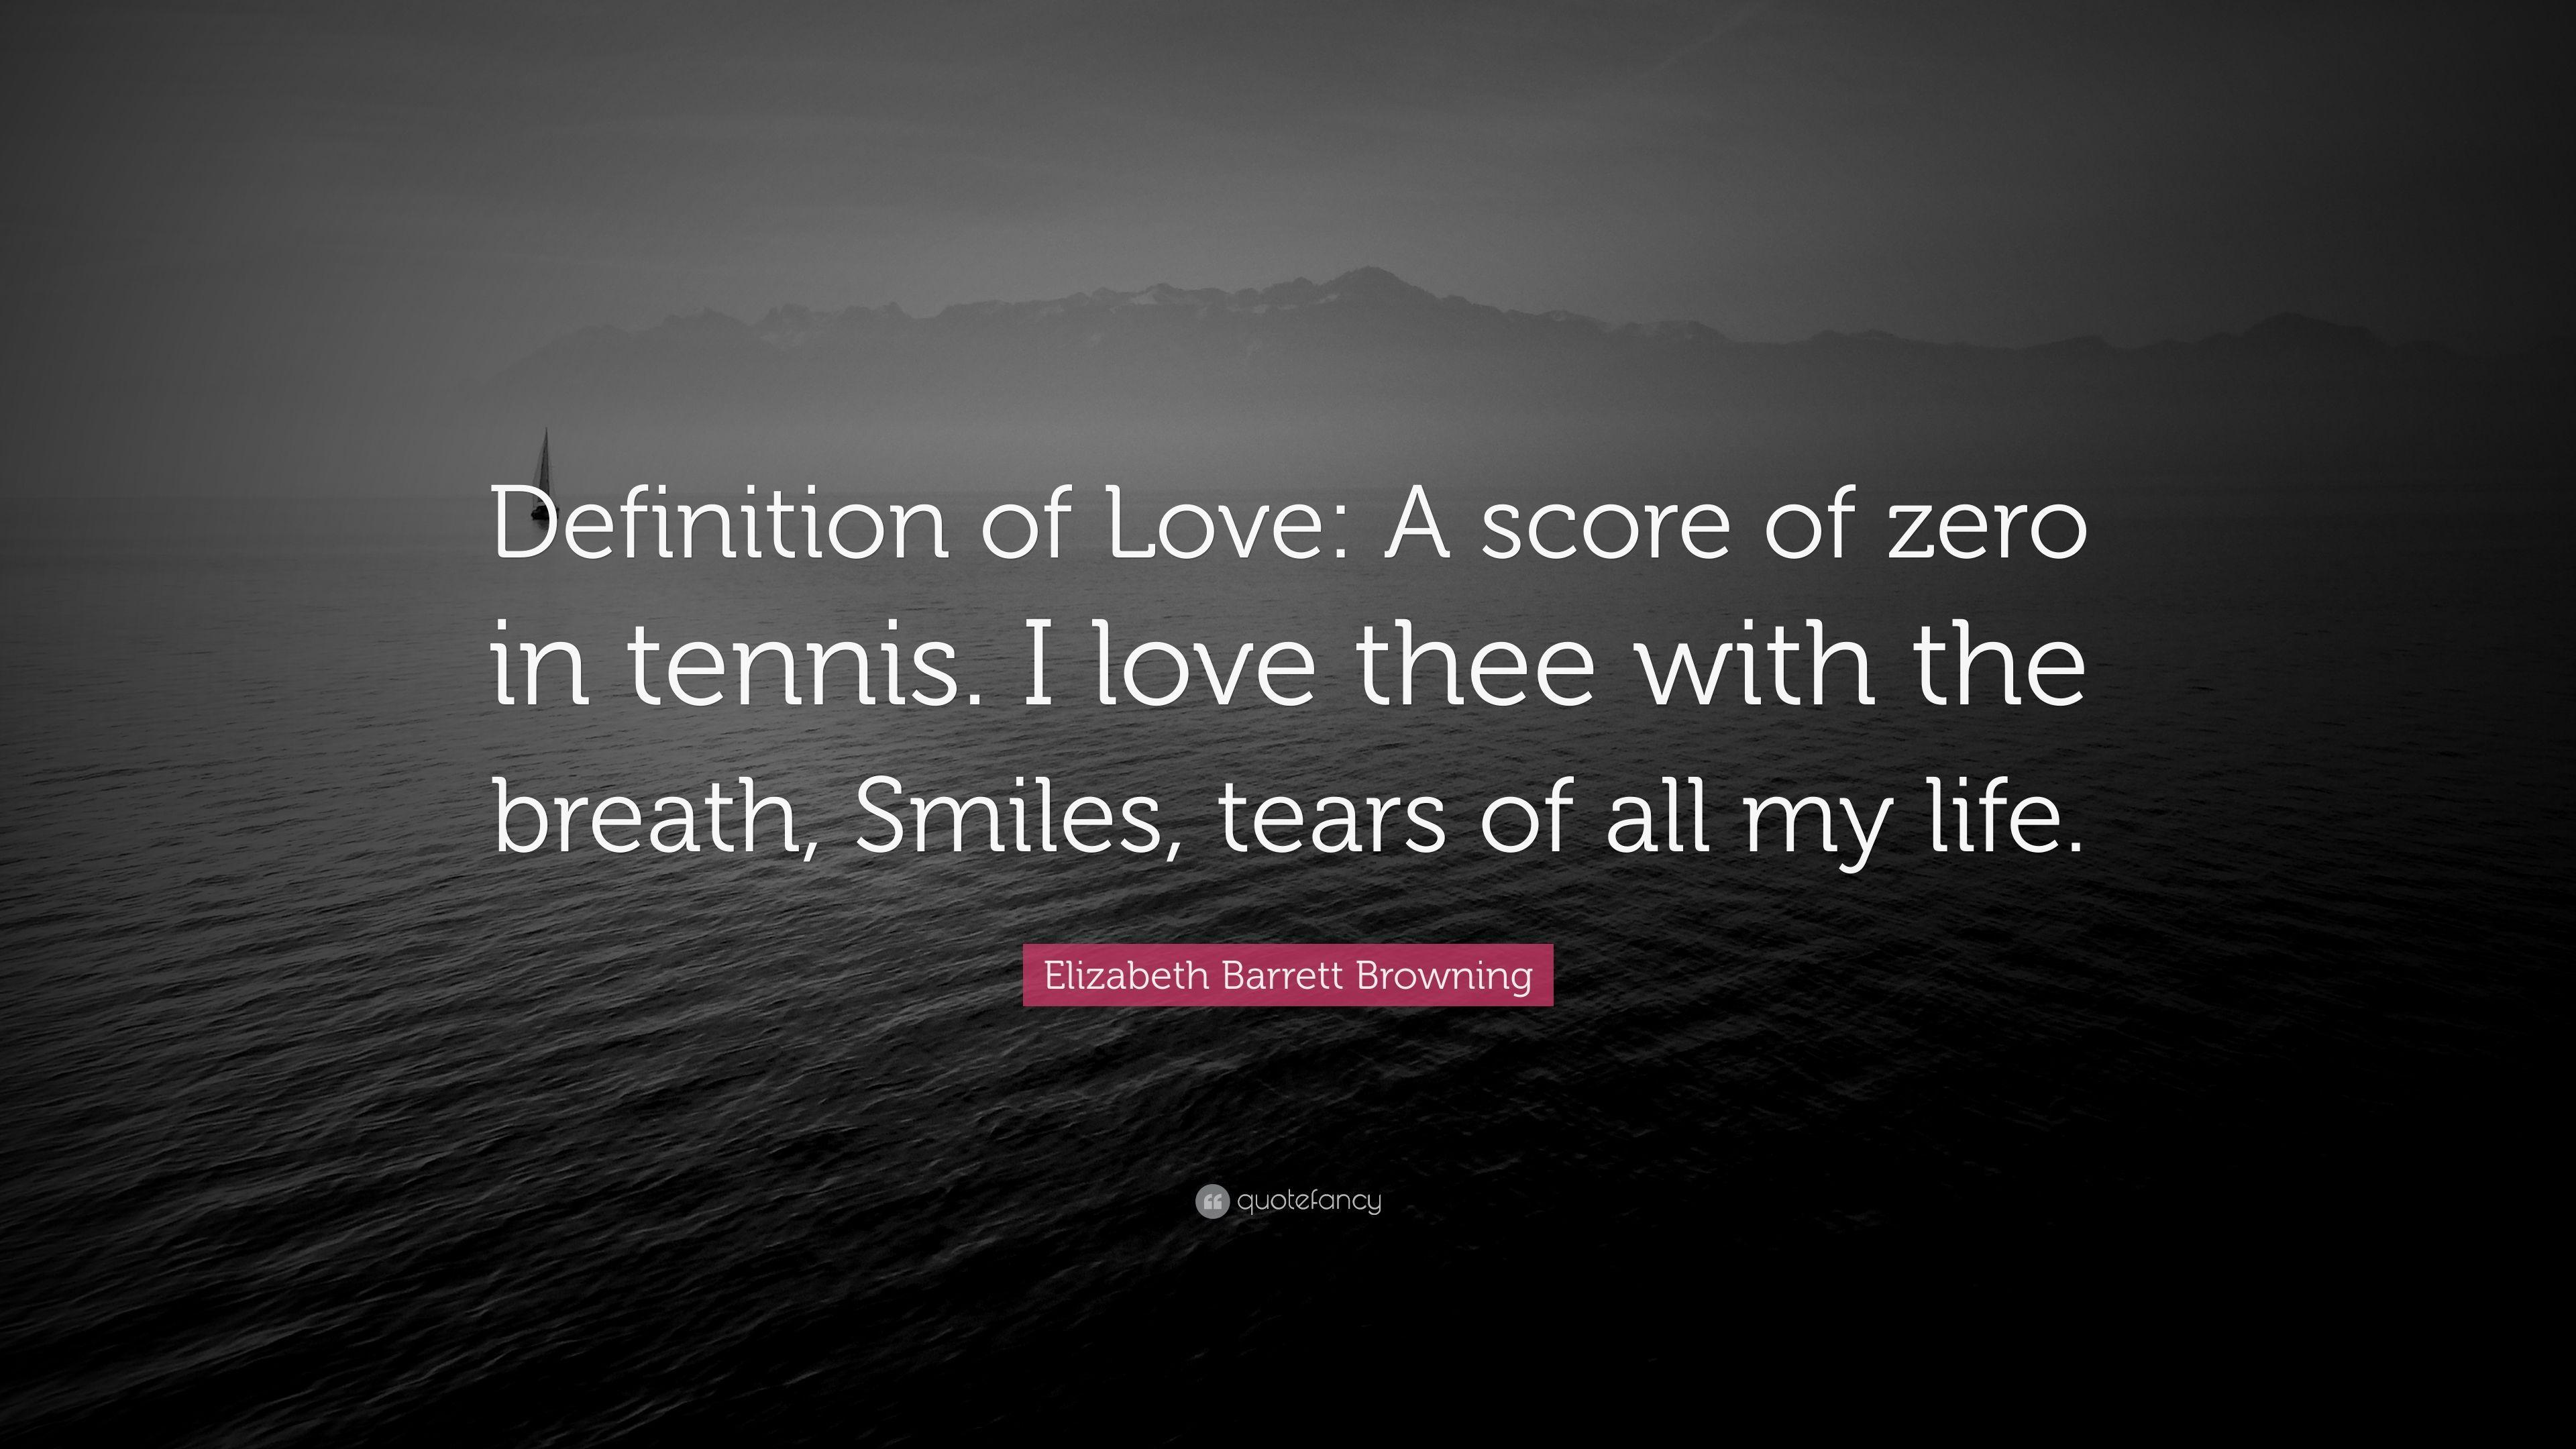 Elizabeth Barrett Browning Quote: “Definition of Love: A score